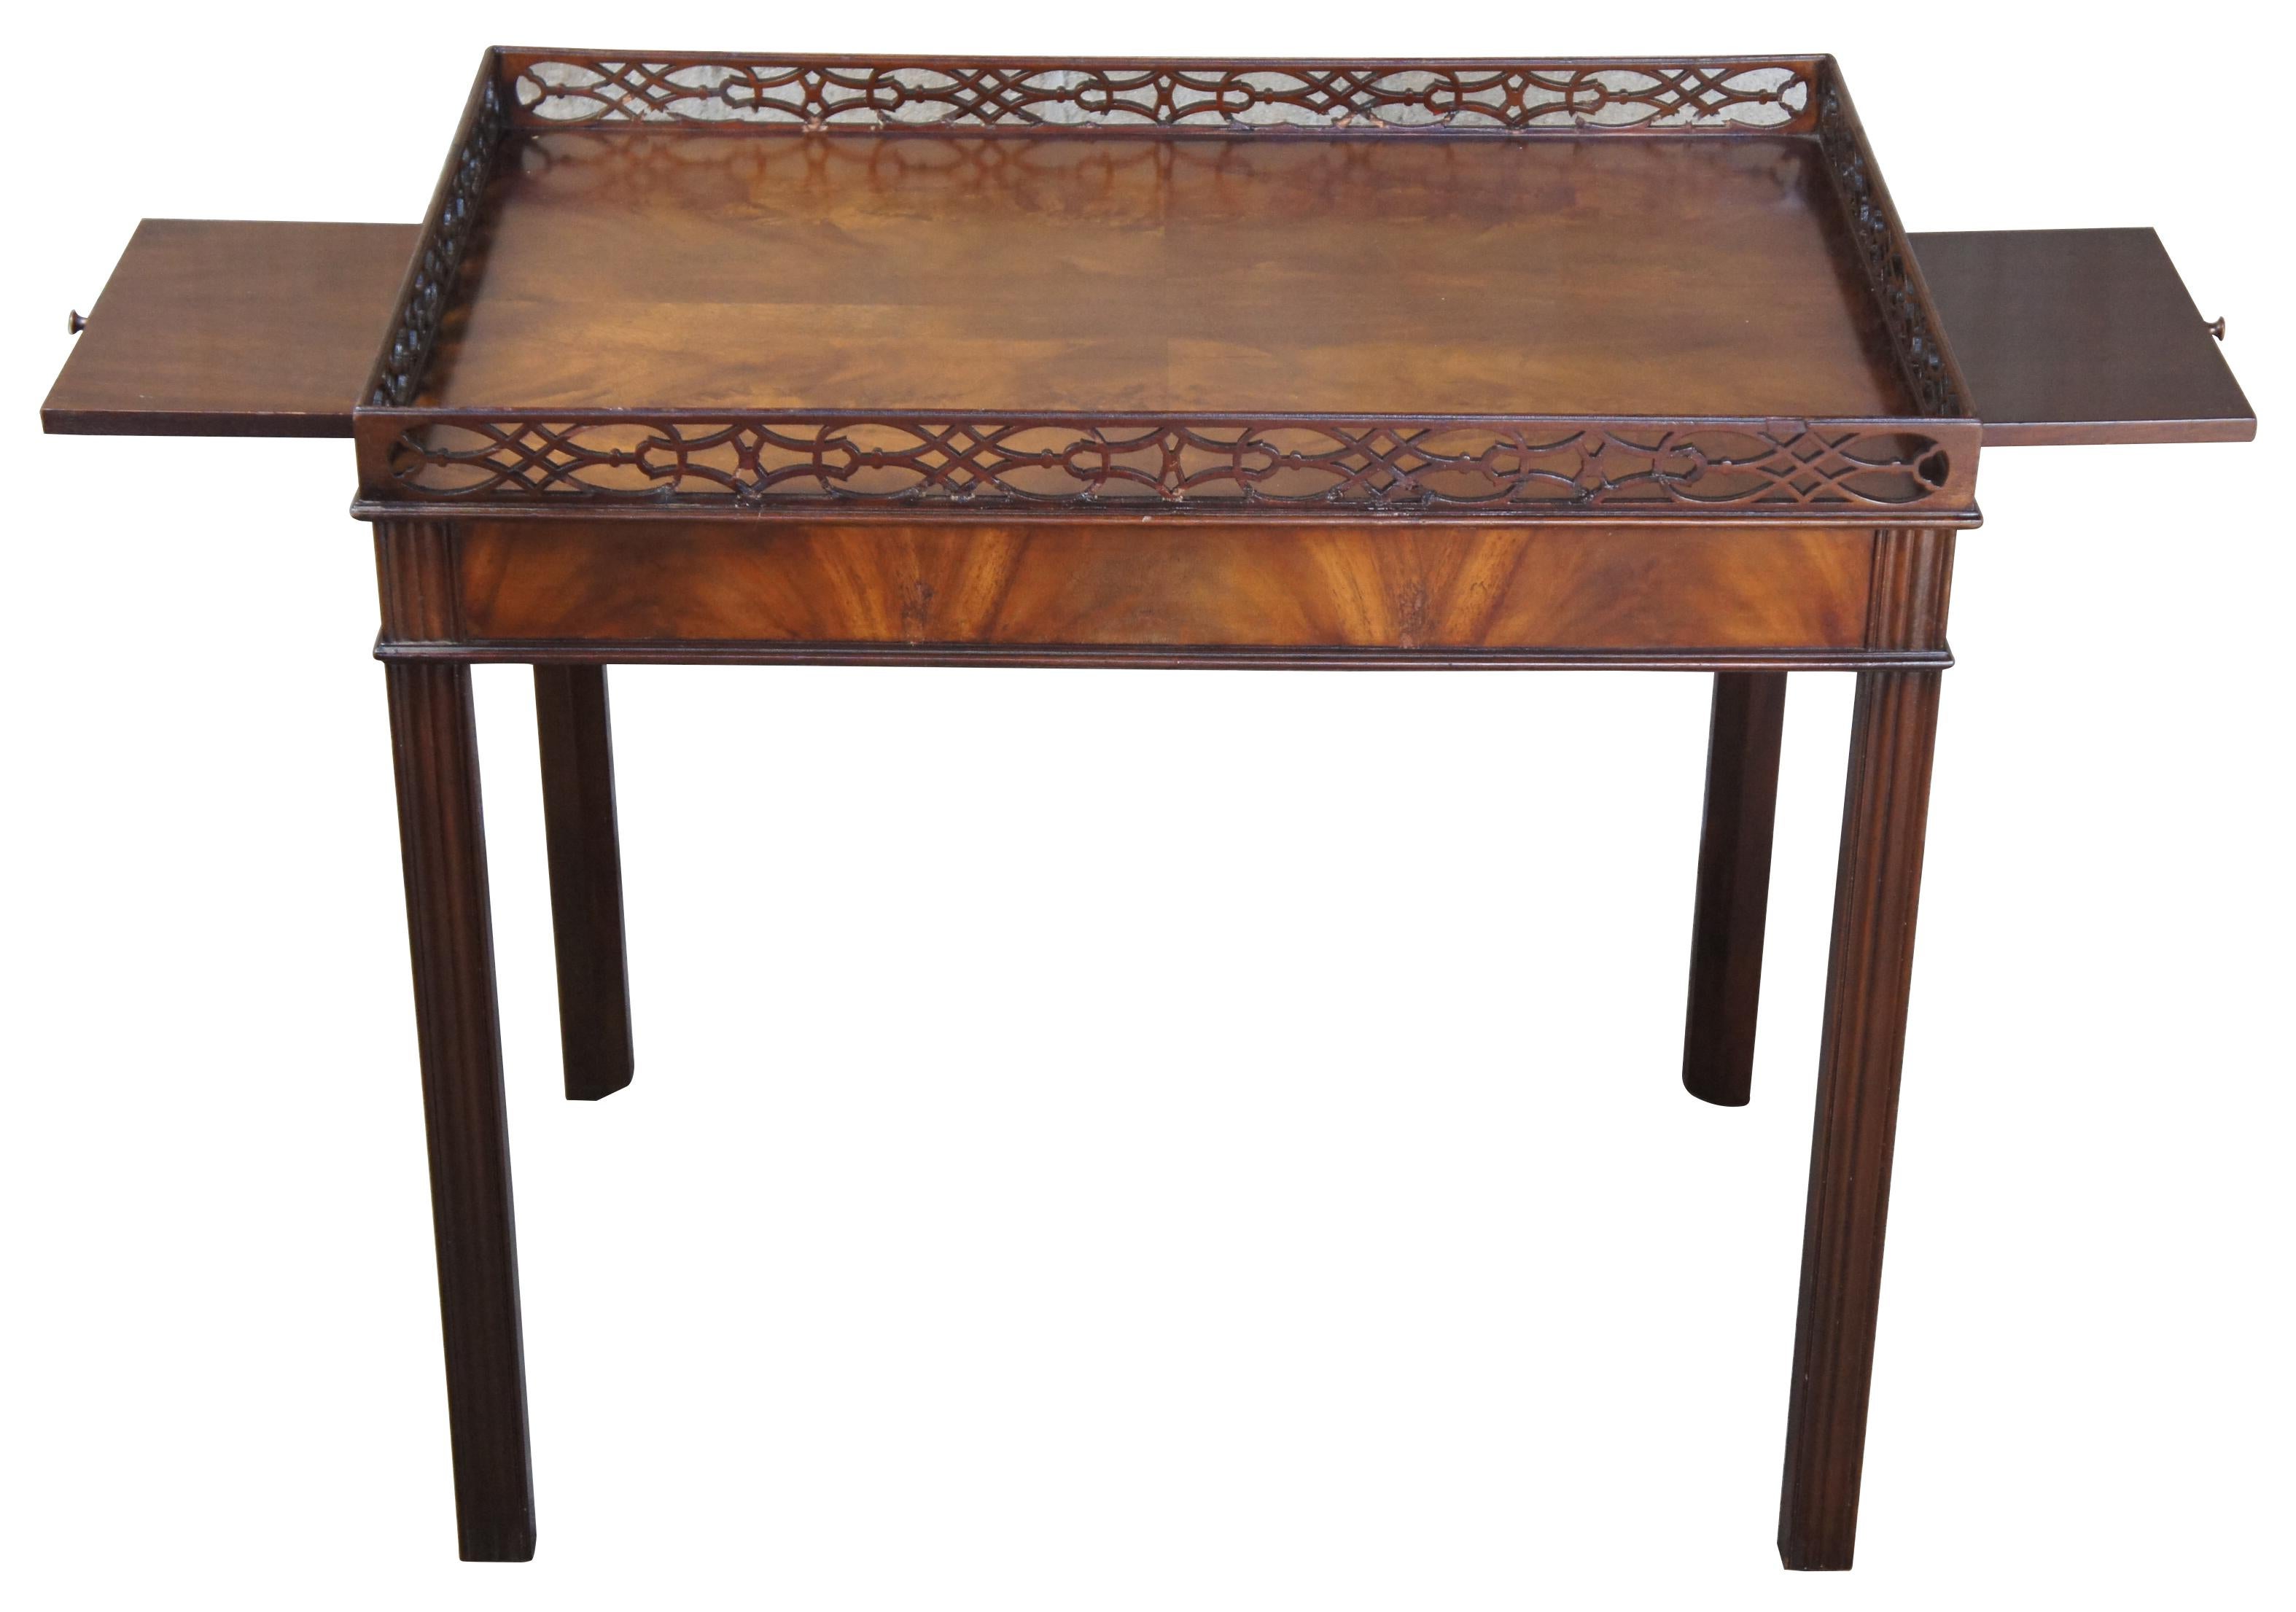 Baker Collectors edition Chippendale style mahogany tea tray table parlor accent

The Collectors edition by Baker Furniture is inspired by iconic Chippendale styling with a raised gallery of carved fretwork over a matchbook veneered top. Features